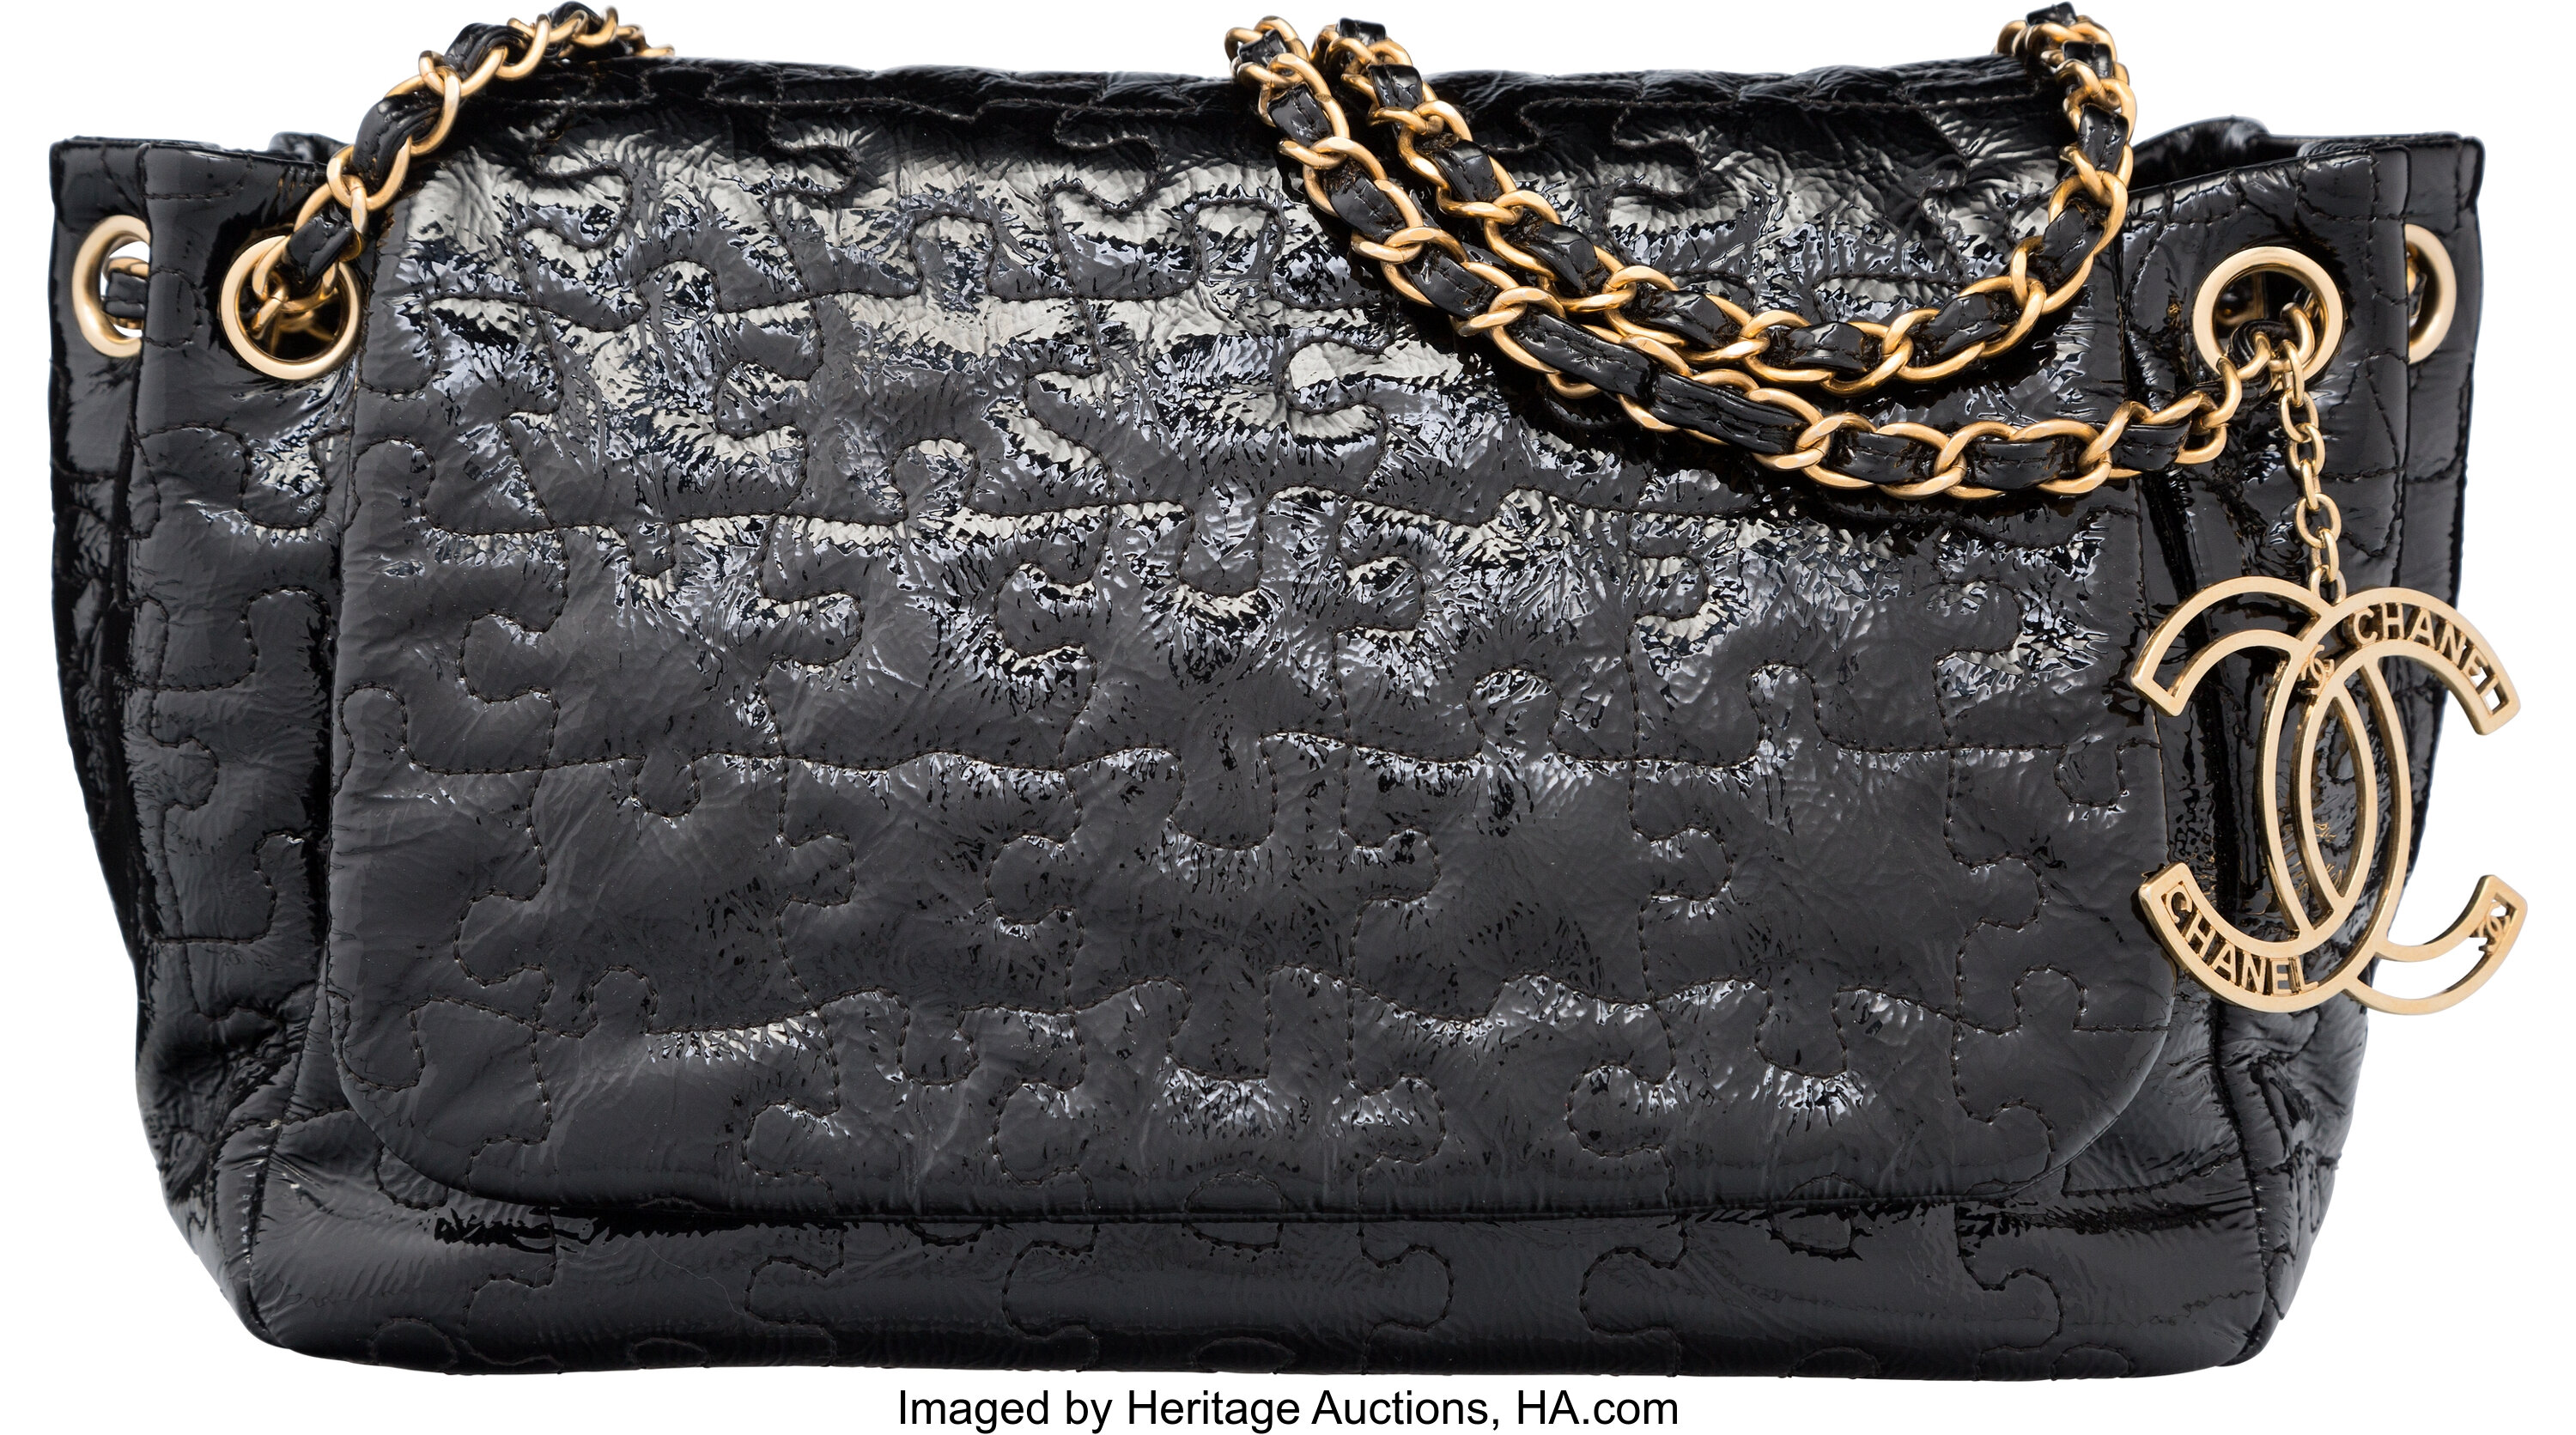 Chanel Black Quilted Patent Leather Puzzle Shoulder Bag with Gold